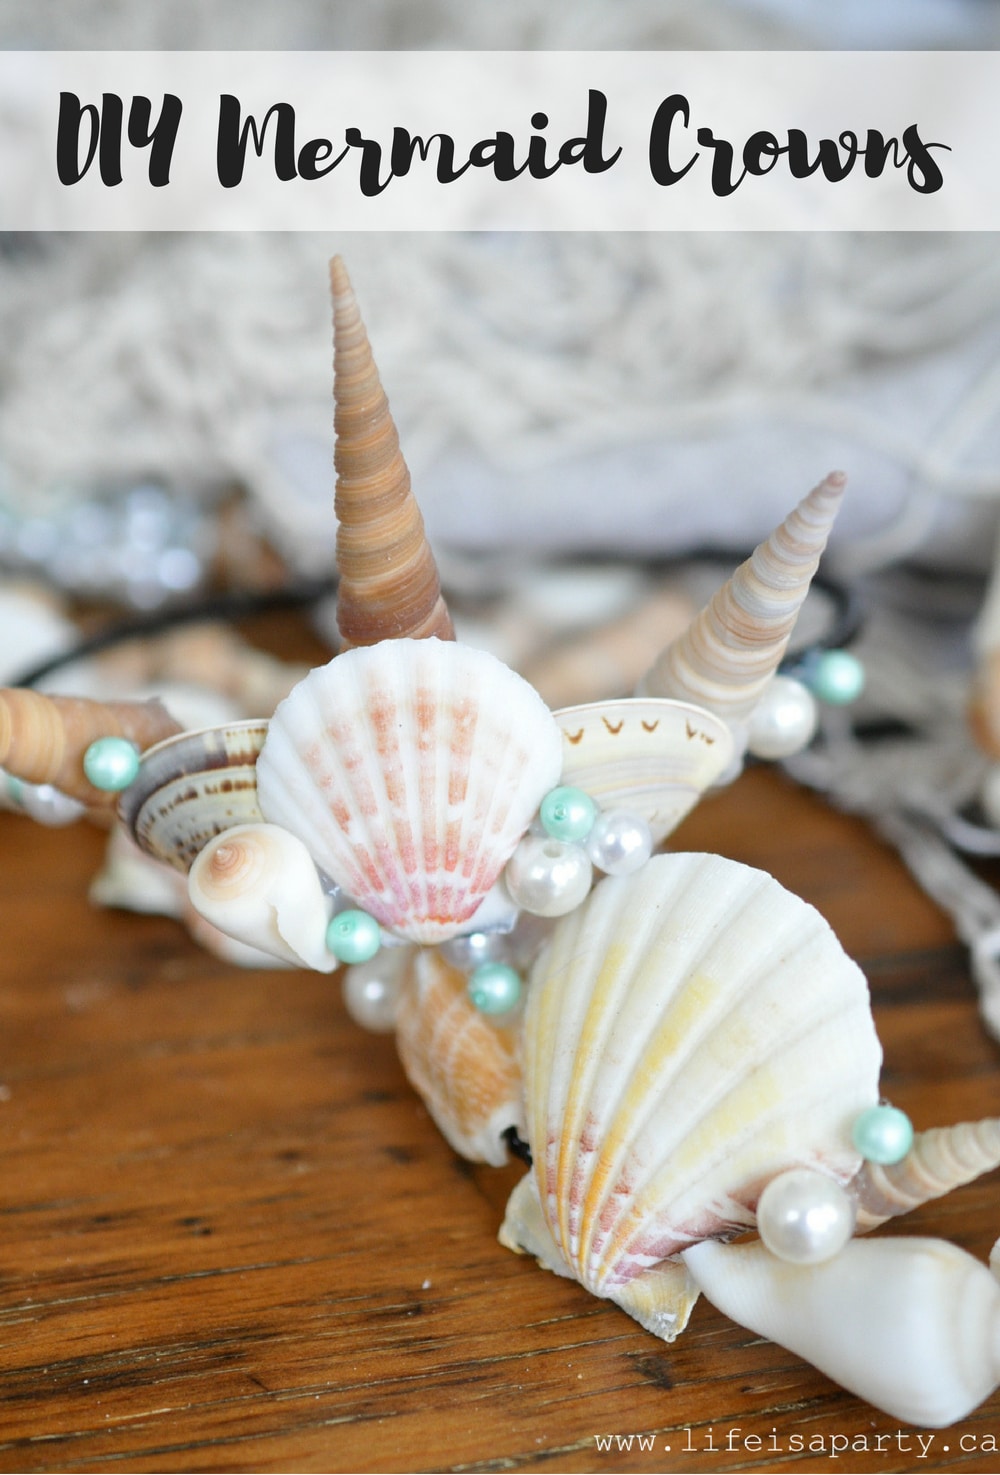 DIY Mermaid Crown: use some shells, faux pearls, hair bands and hot glue to create your own beautiful Mermaid Crown. Perfect for dress up, or as part of a Mermaid Party!